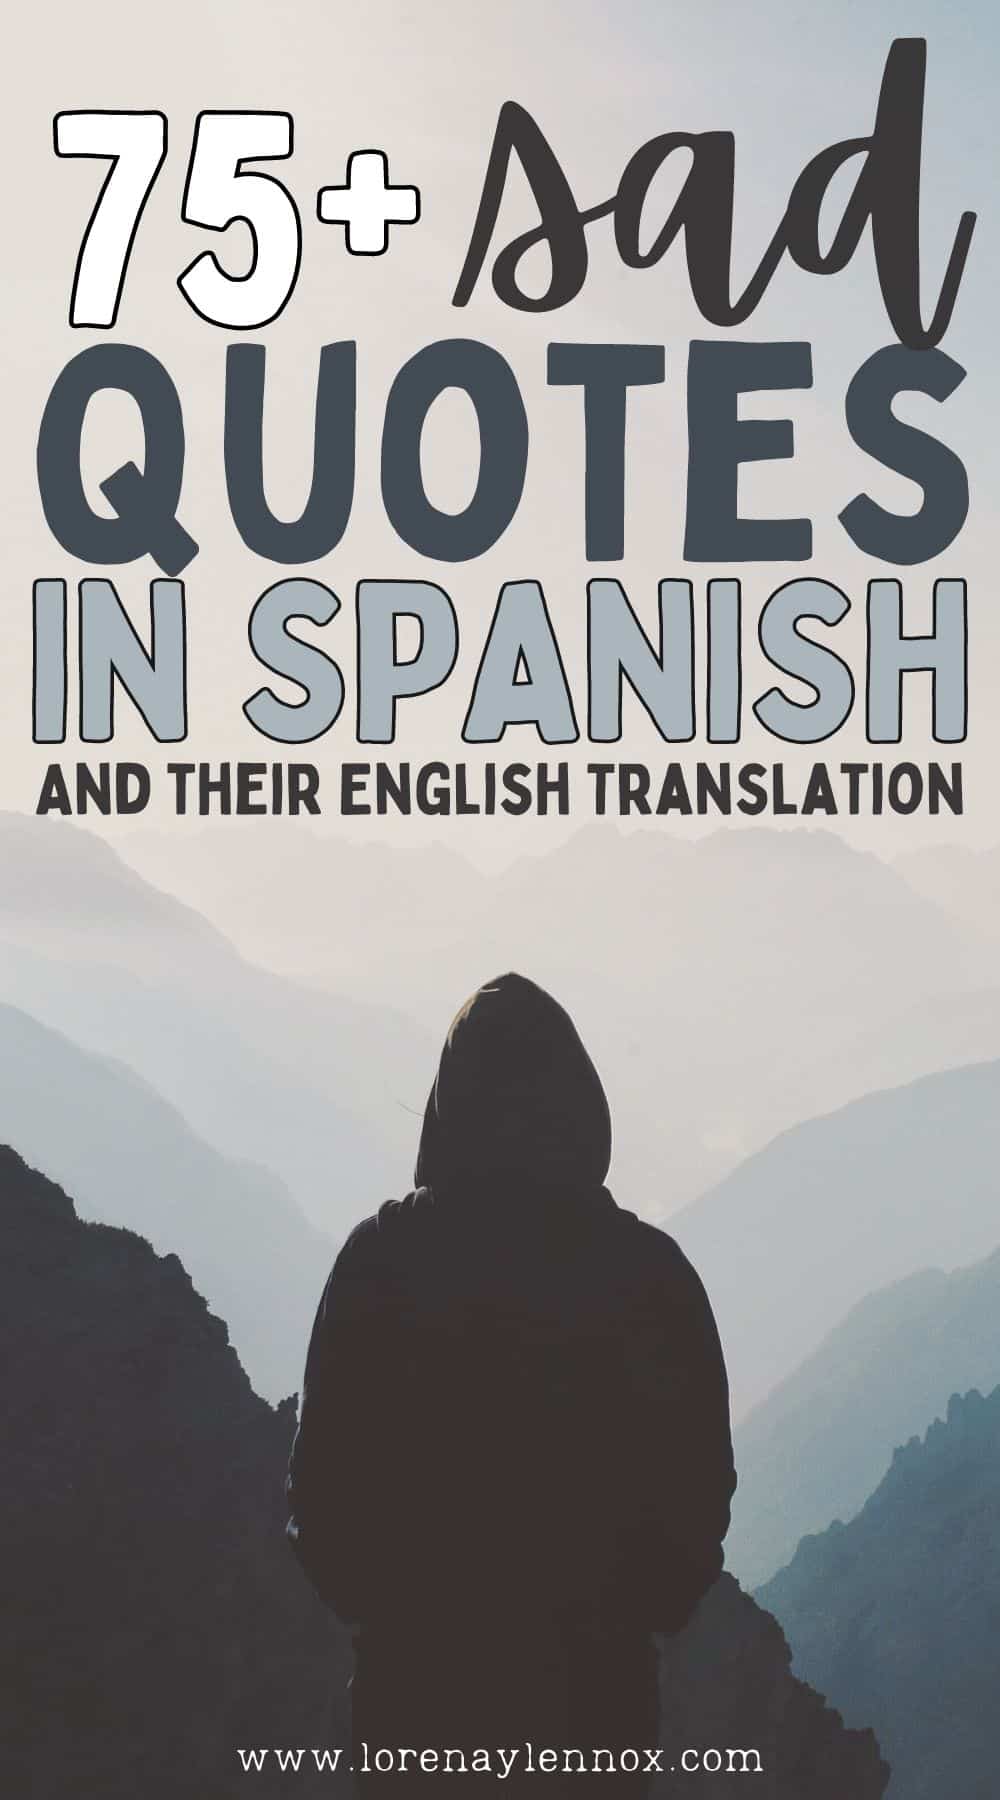 Today I want to share a list of 75+ sad quotes in Spanish and their English translation. These quotes serve as powerful expressions of deep emotions and reflections on sadness in various aspects of life. Within this collection, you will discover a wide range of sad quotes in Spanish that touch upon both the sadness associated with life as well as the sadness associated with love and personal relationships.